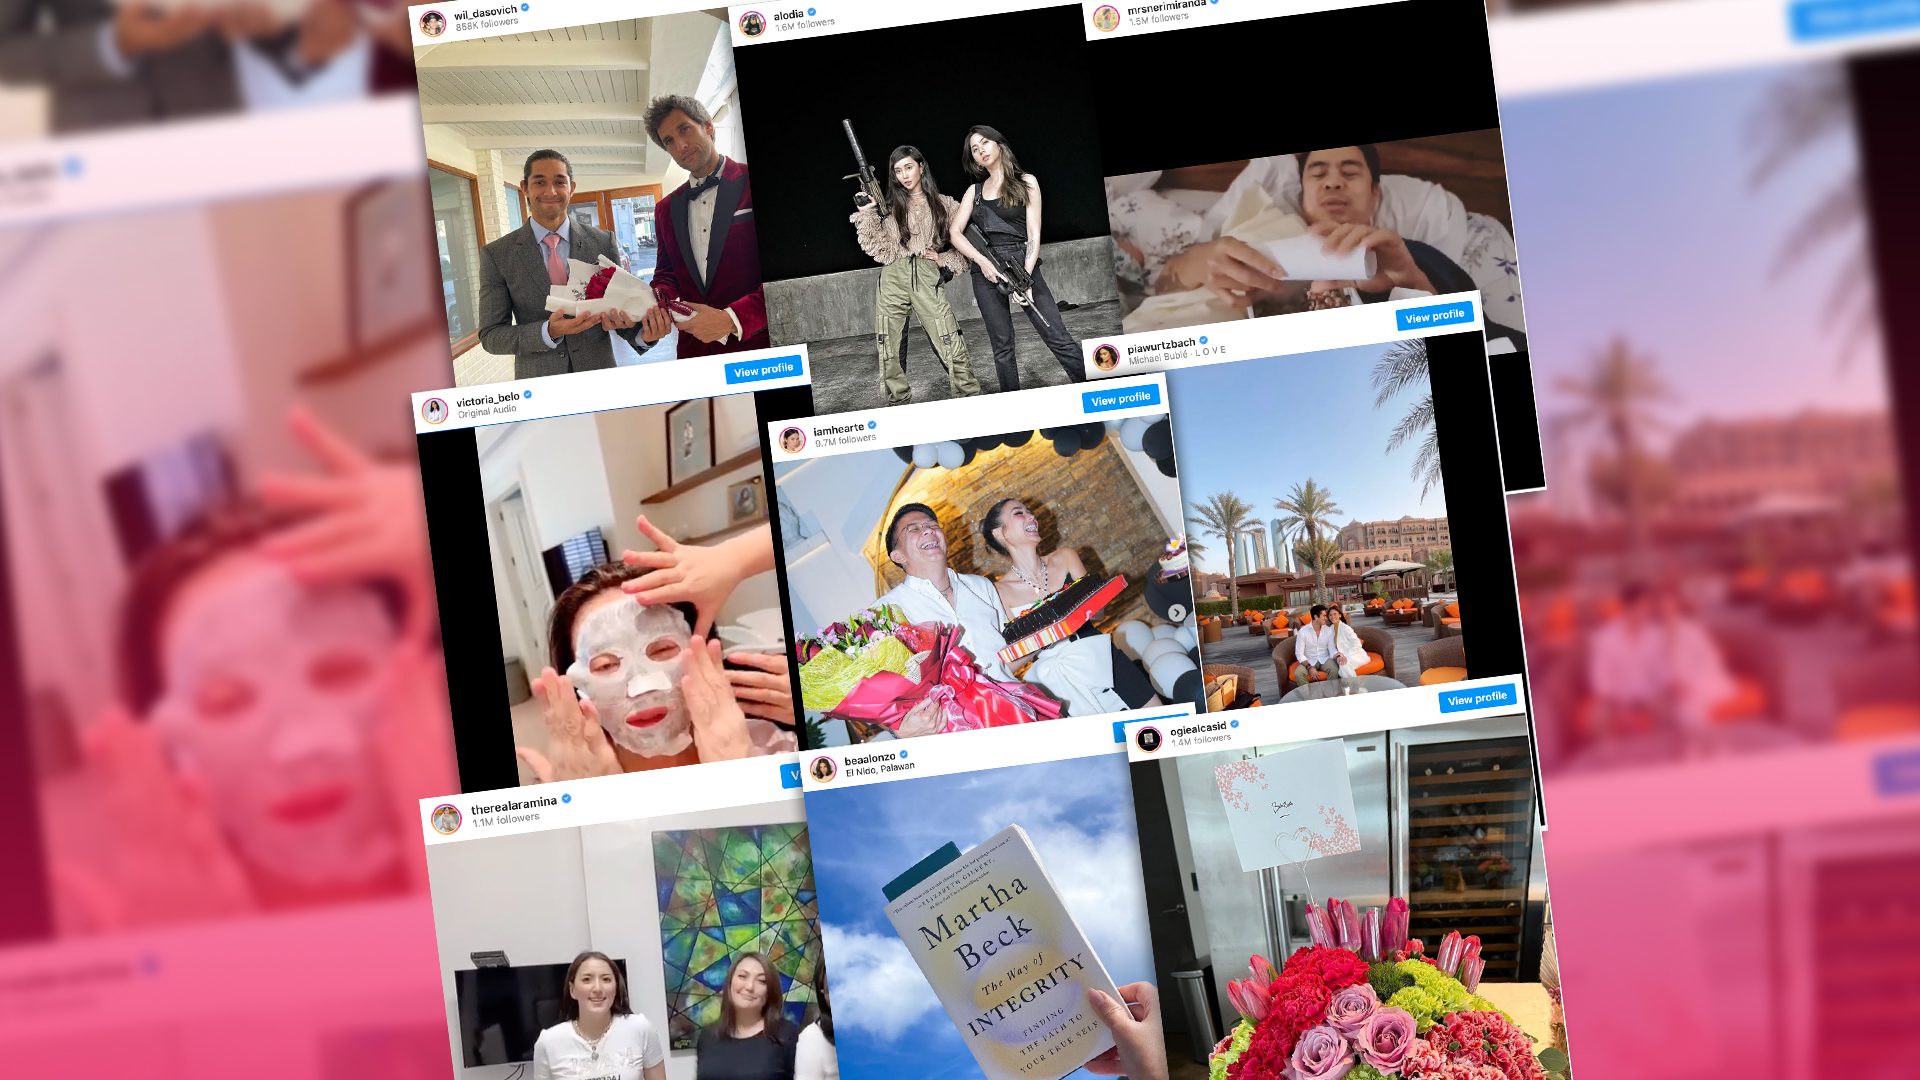 Roses, beaches, and Korean face masks: How PH celebrities spent Valentine’s Day 2022